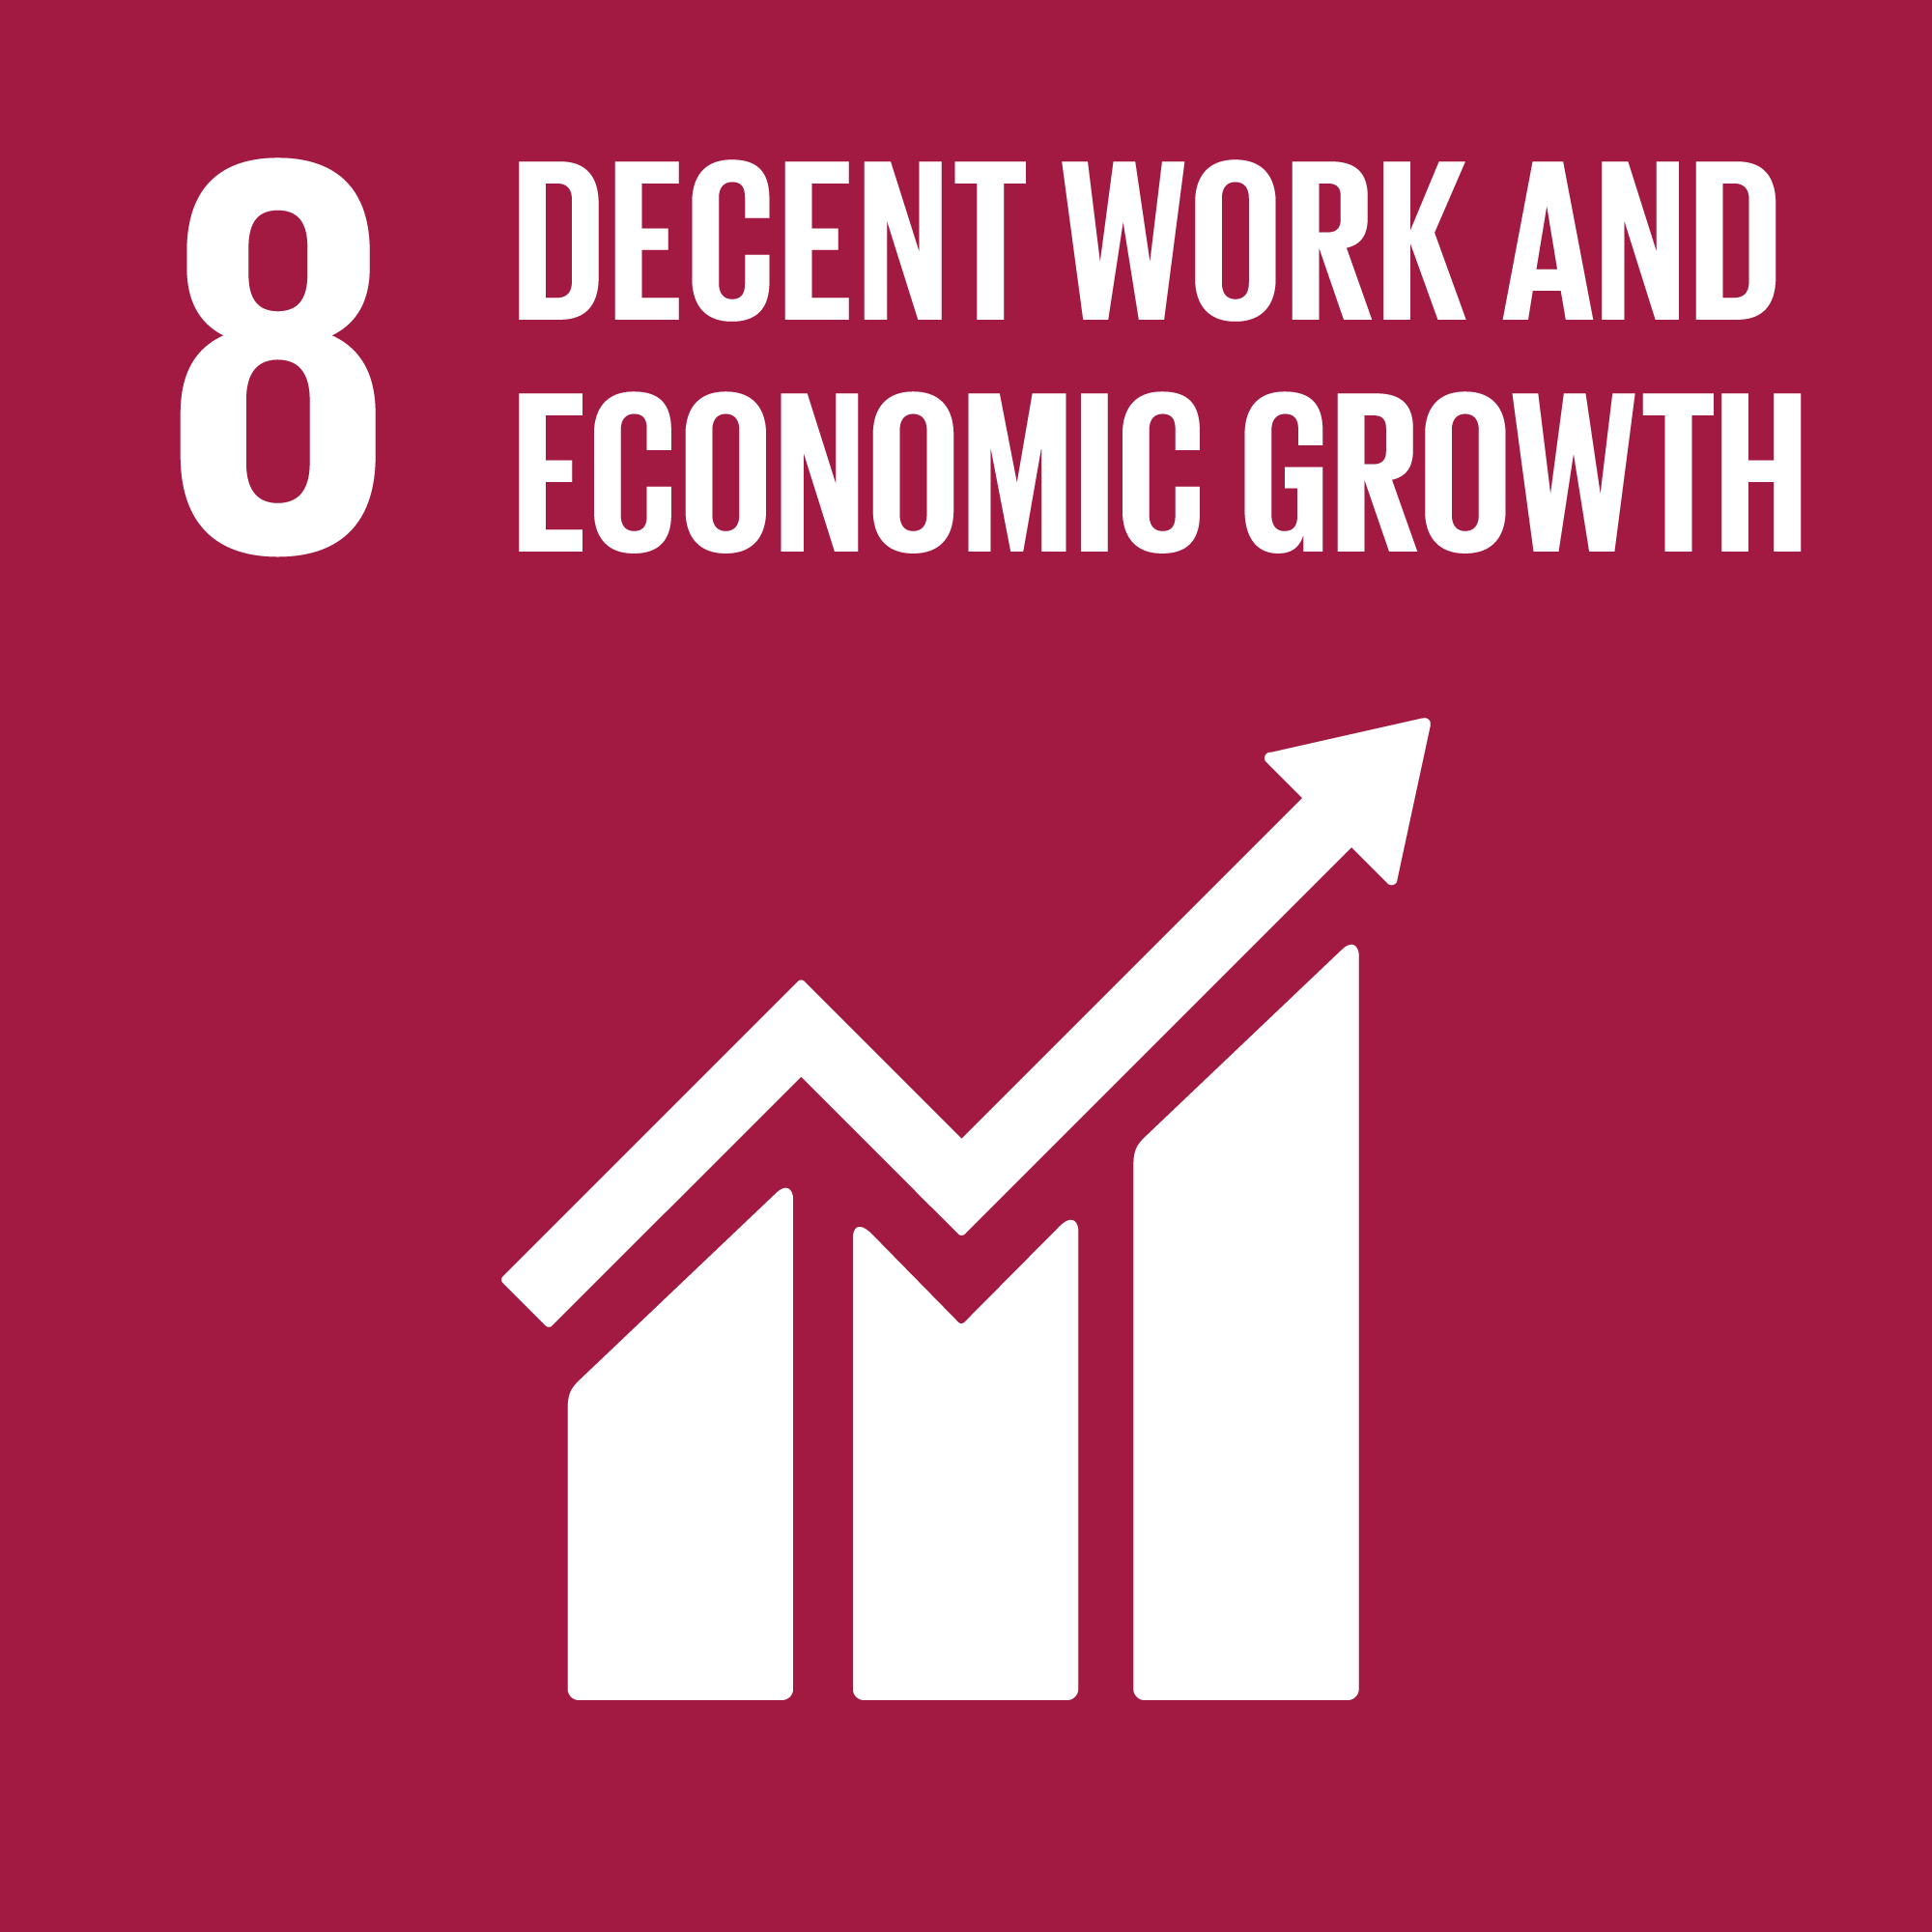 Sustainable Goal 8: Decent Work and Economic Growth